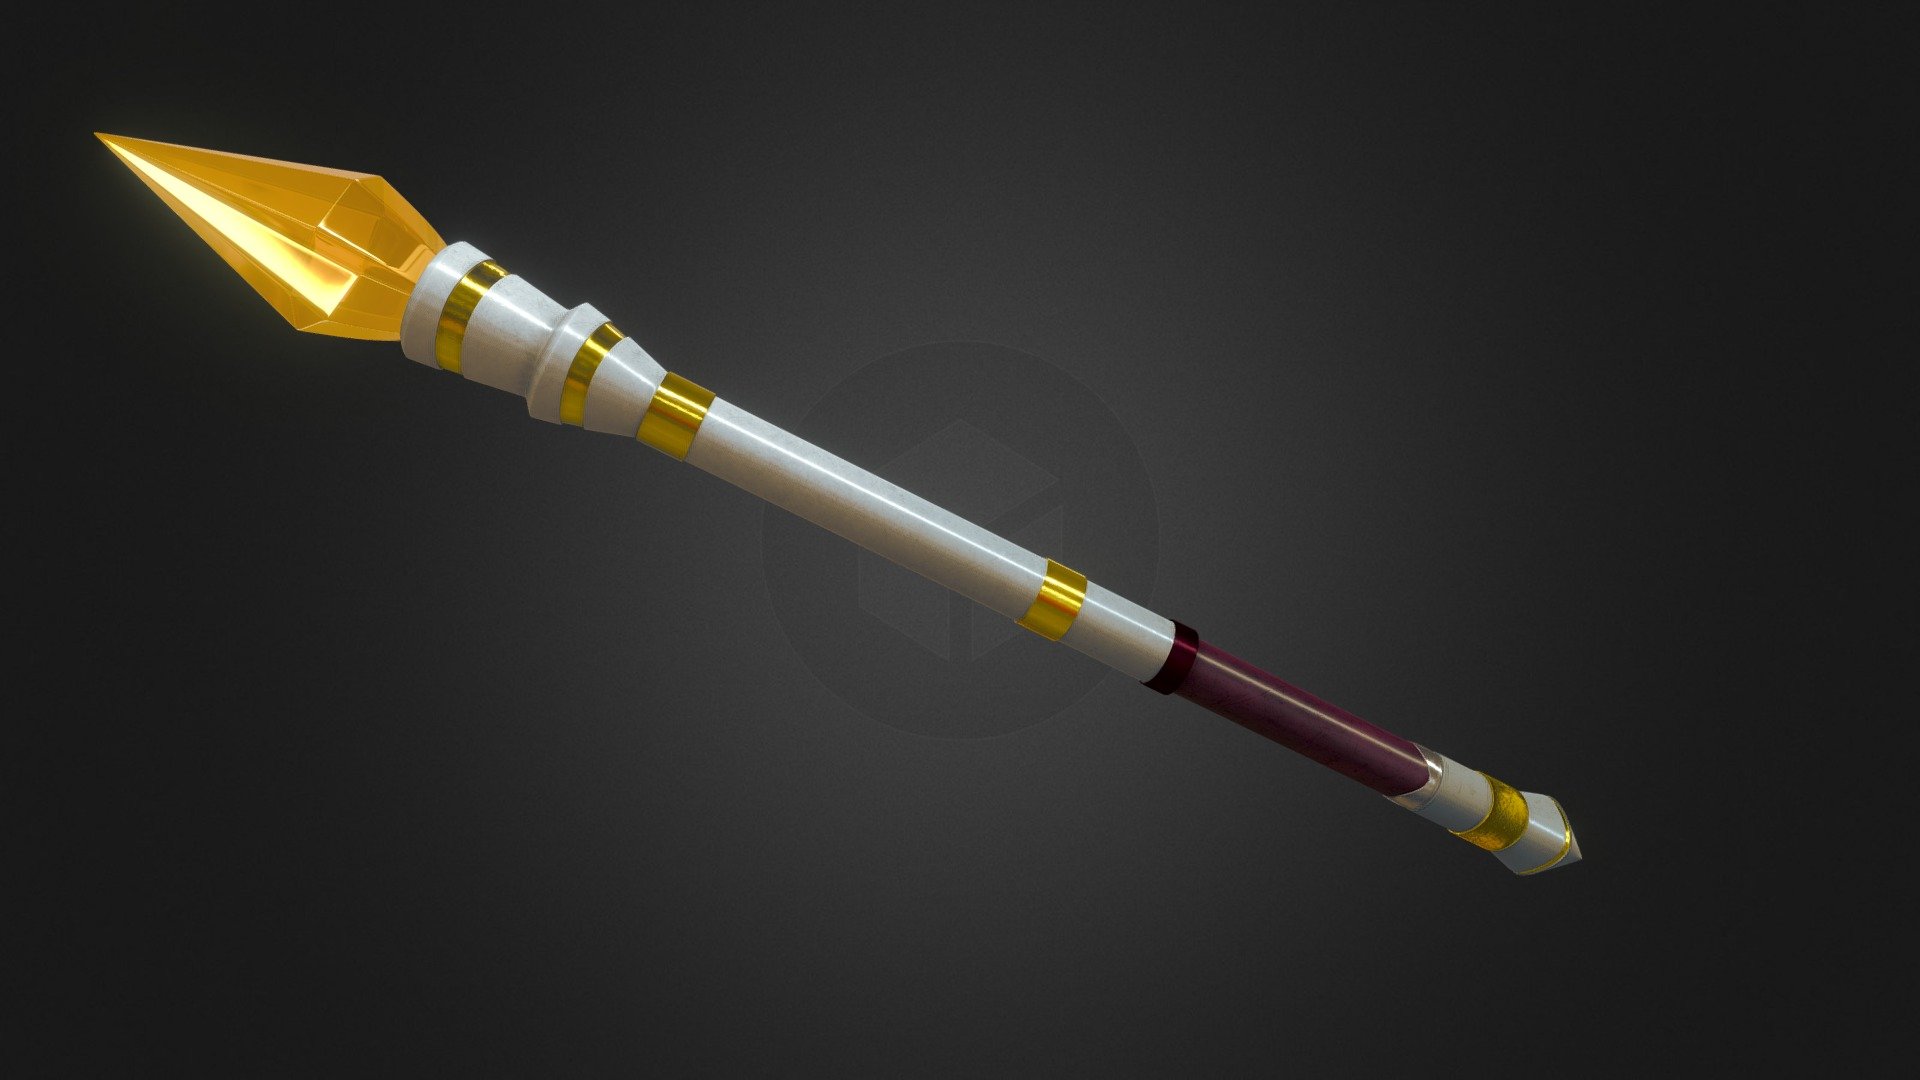 This 3d model is created in Blender v.2.80 and exported in format (.obj), (.fbx)

Textures(4096x4096) are in .png file format.

UV map - non-overlapping - Magic Wand - 3D model by Konstantin Kaftaykin (@3dKostya) 3d model